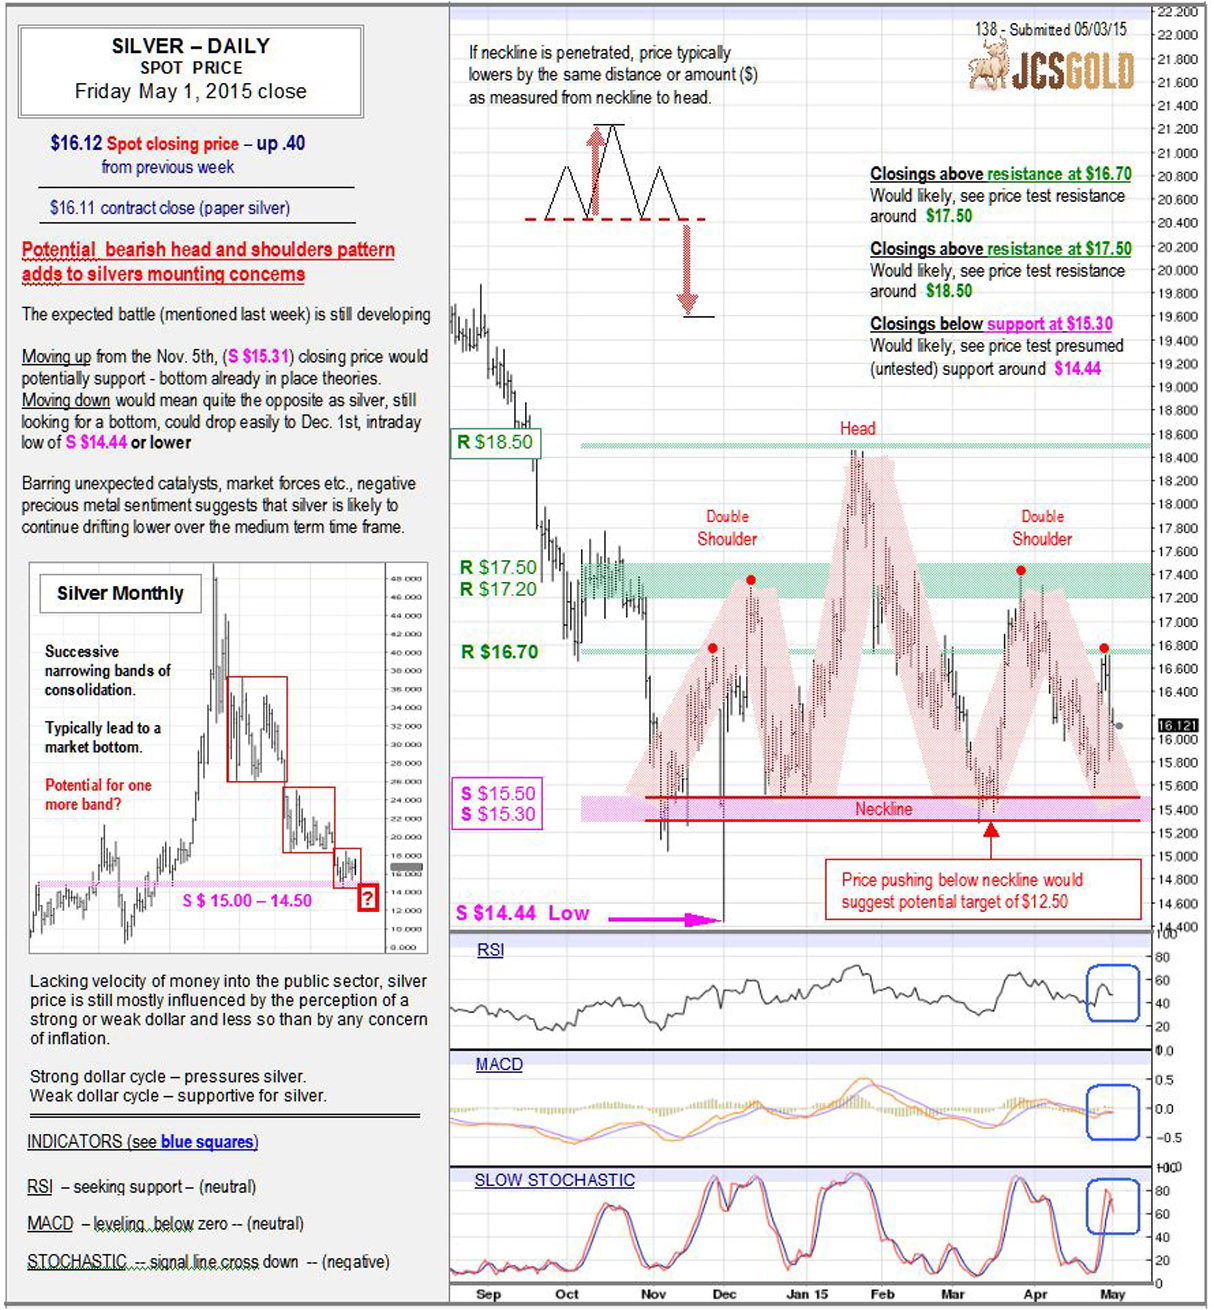 May 1, 2015 chart & commentary